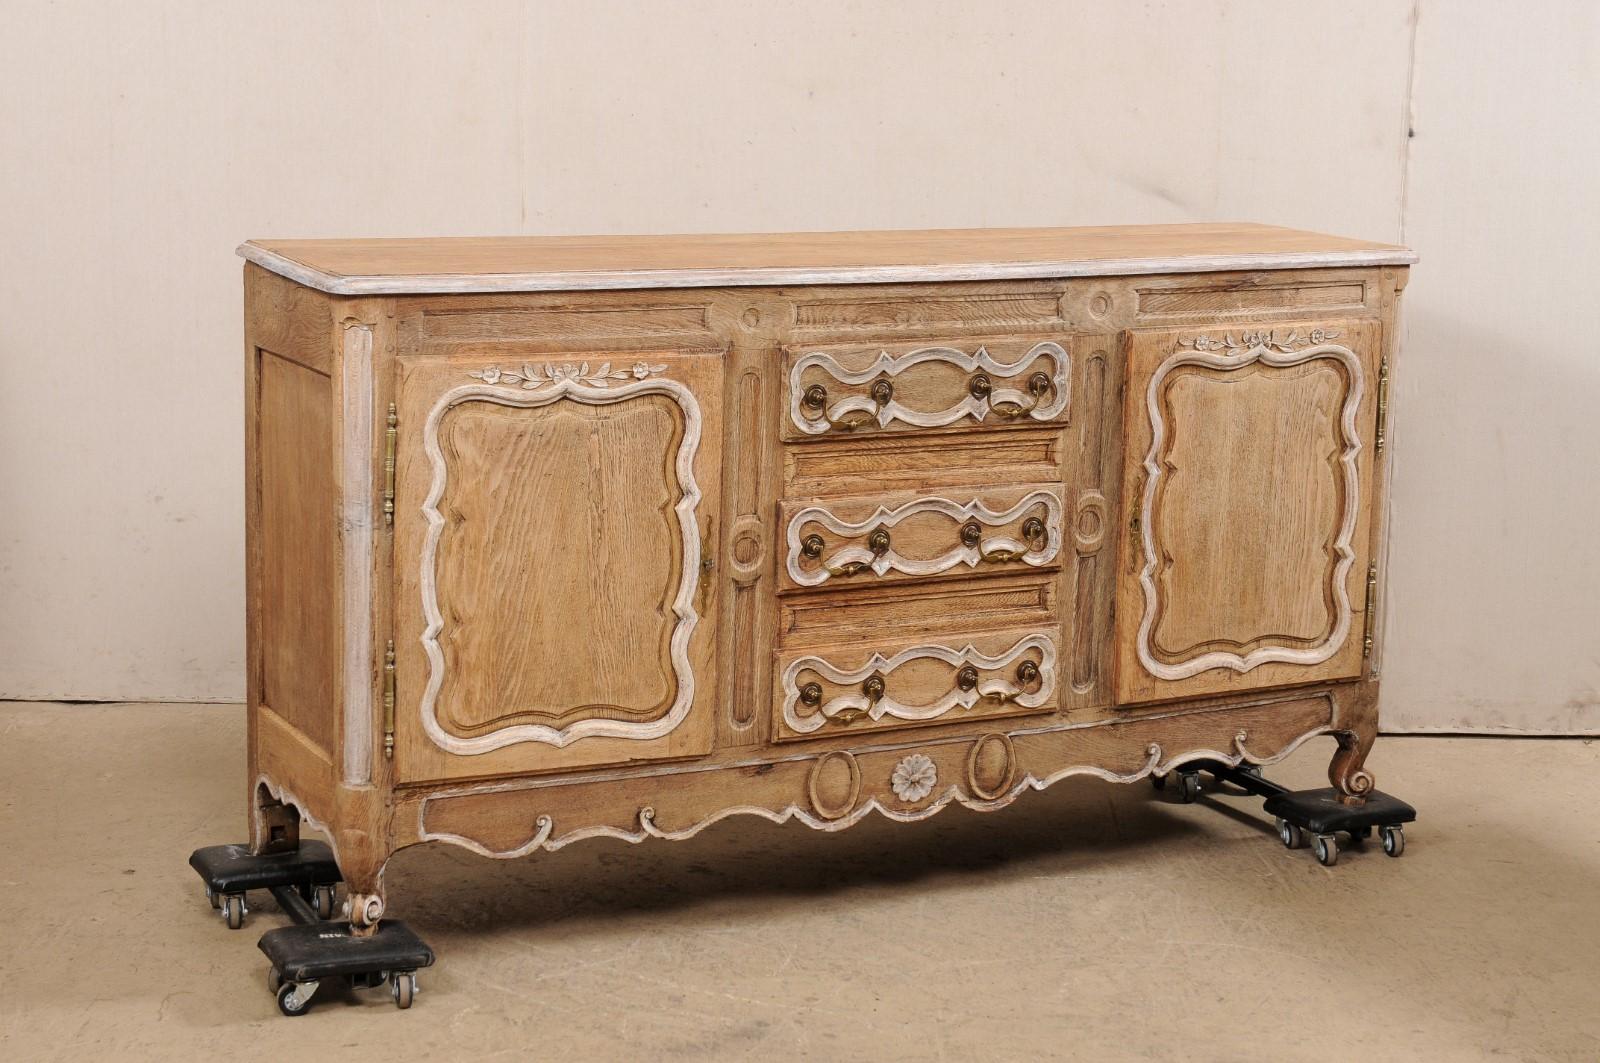 A French neoclassical period carved oak buffet cabinet from the early 19th century. This antique console cabinet from France has nicely appointed details and features a rectangular-shaped top with softly rounded front corners, over a case which